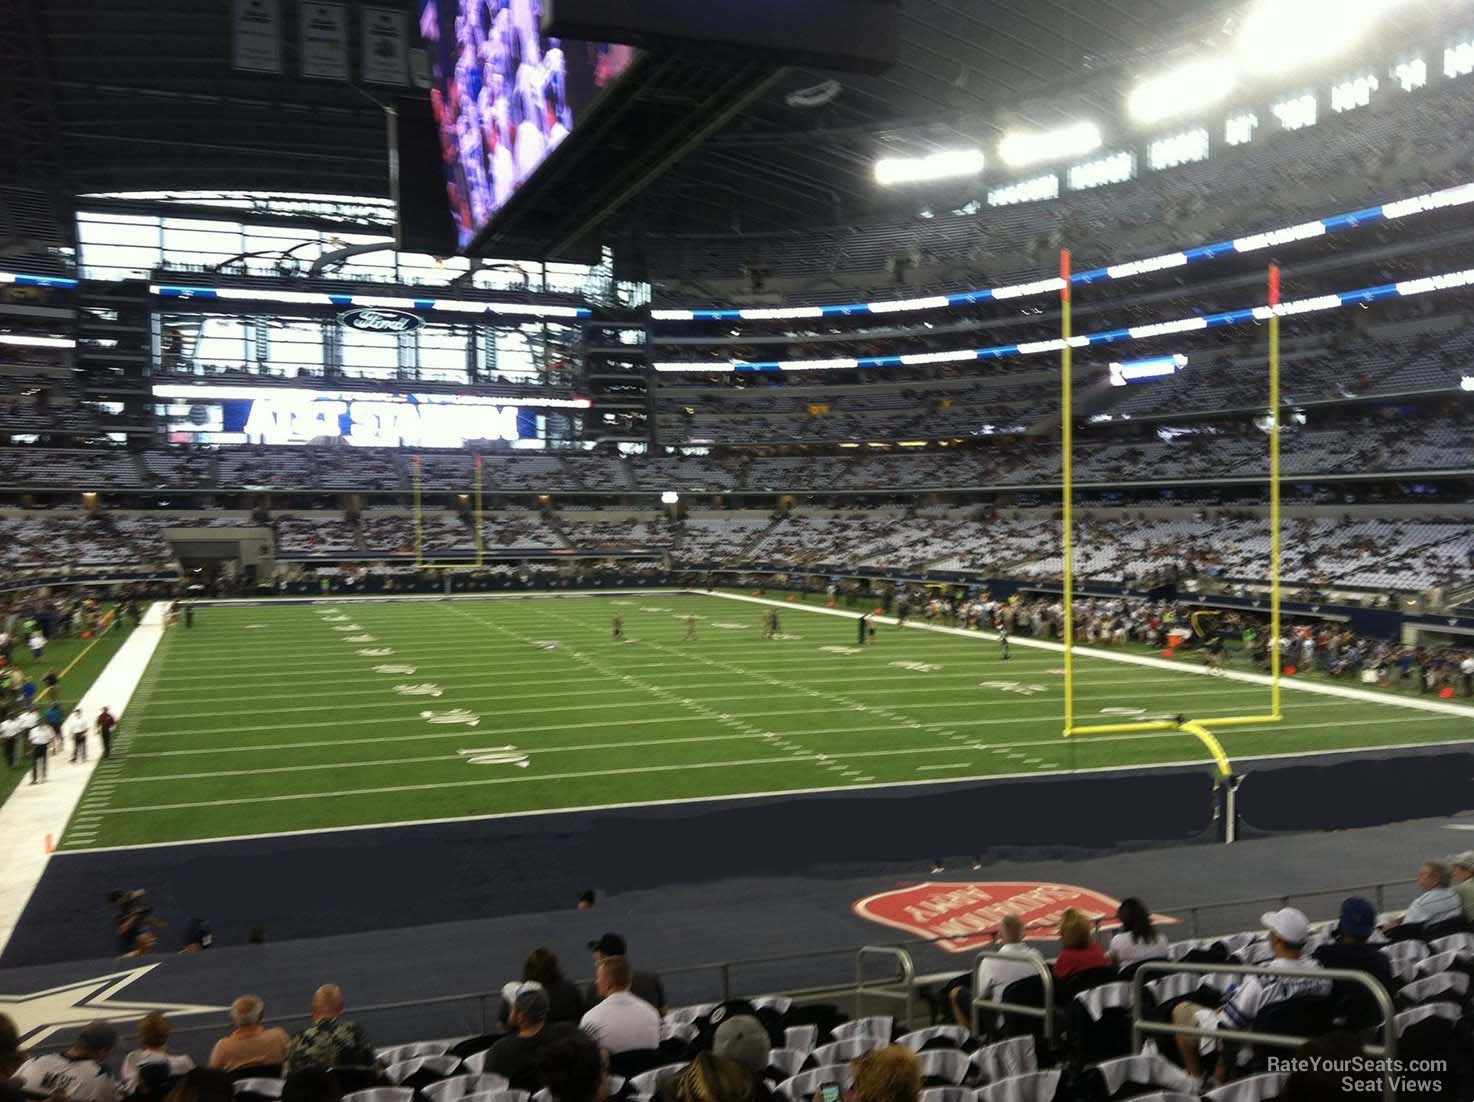 section 125, row 20 seat view  for football - at&t stadium (cowboys stadium)